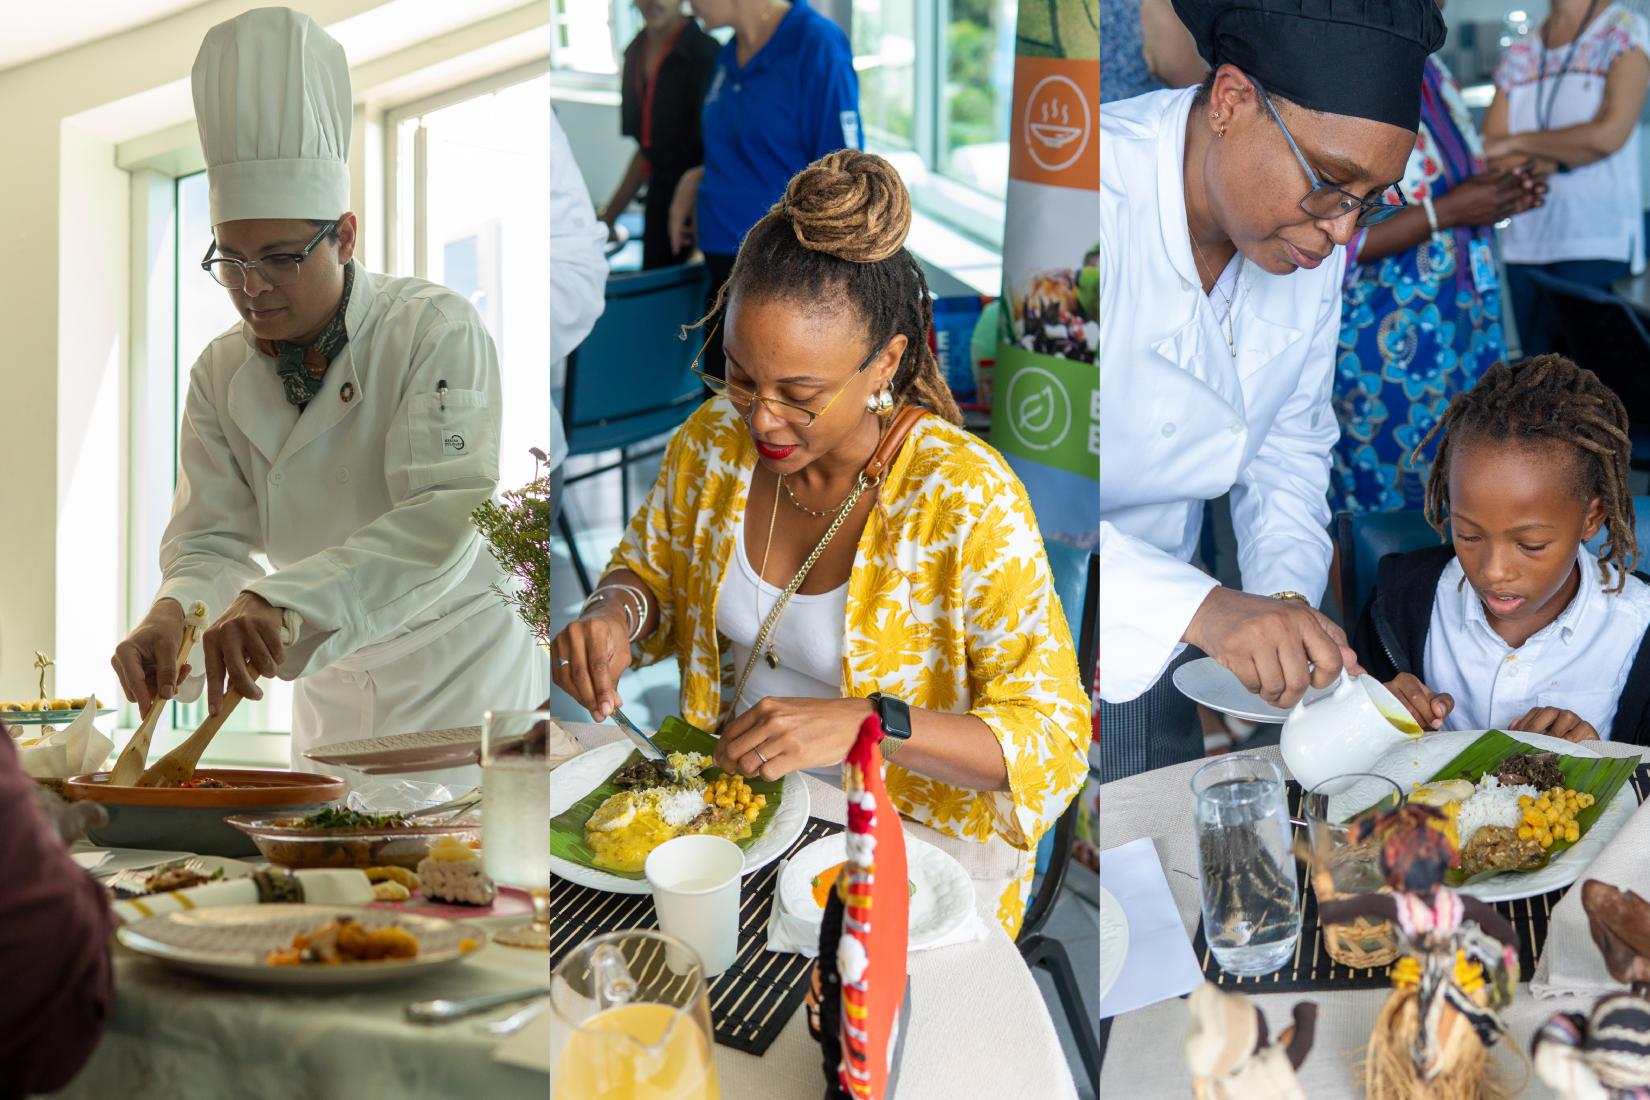 a collage of a man in a chef hat serving food from chef's utentils, a woman in glasses in a yellow kimono sampling a meal, and a woman in a chef's hat serving a sauce on a meal to a young boy